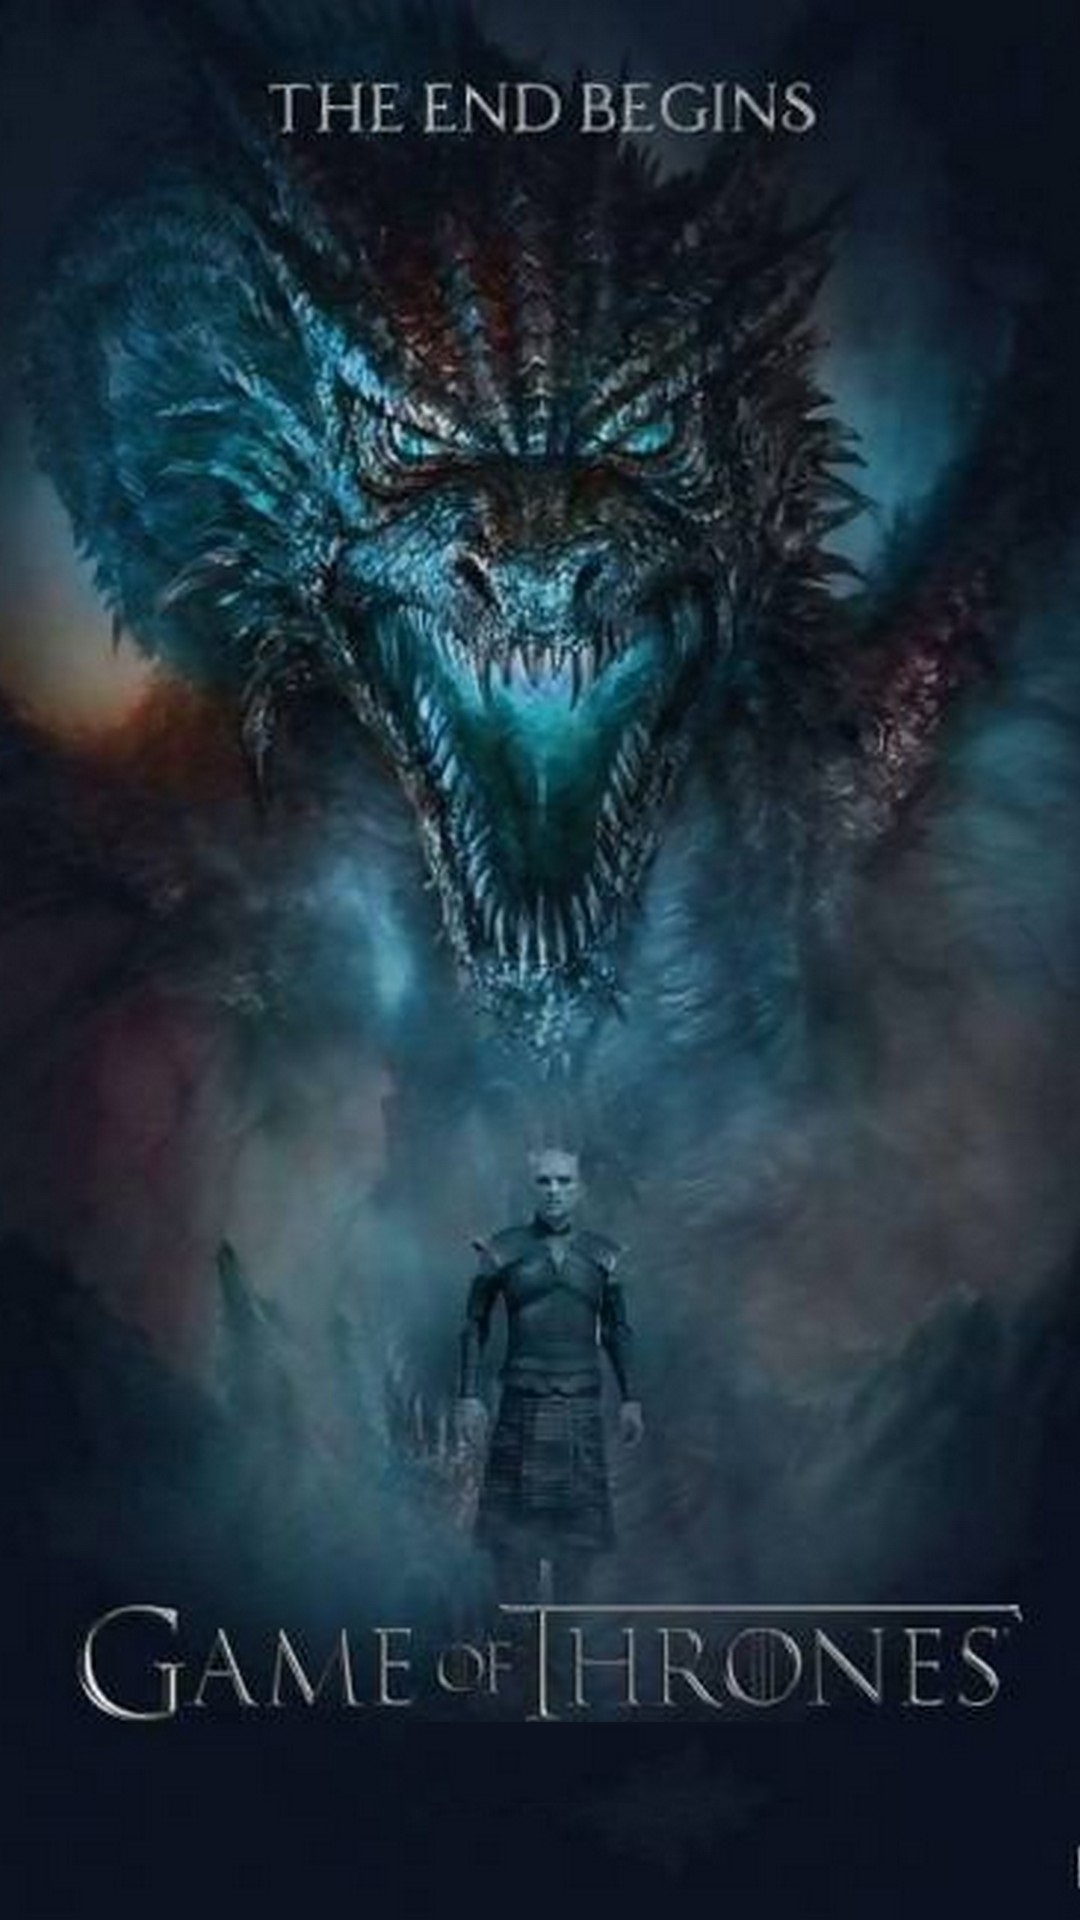 Wallpaper IPhone Game Of Thrones Dragons With High Resolution Resolution Game Of Thrones Dragon